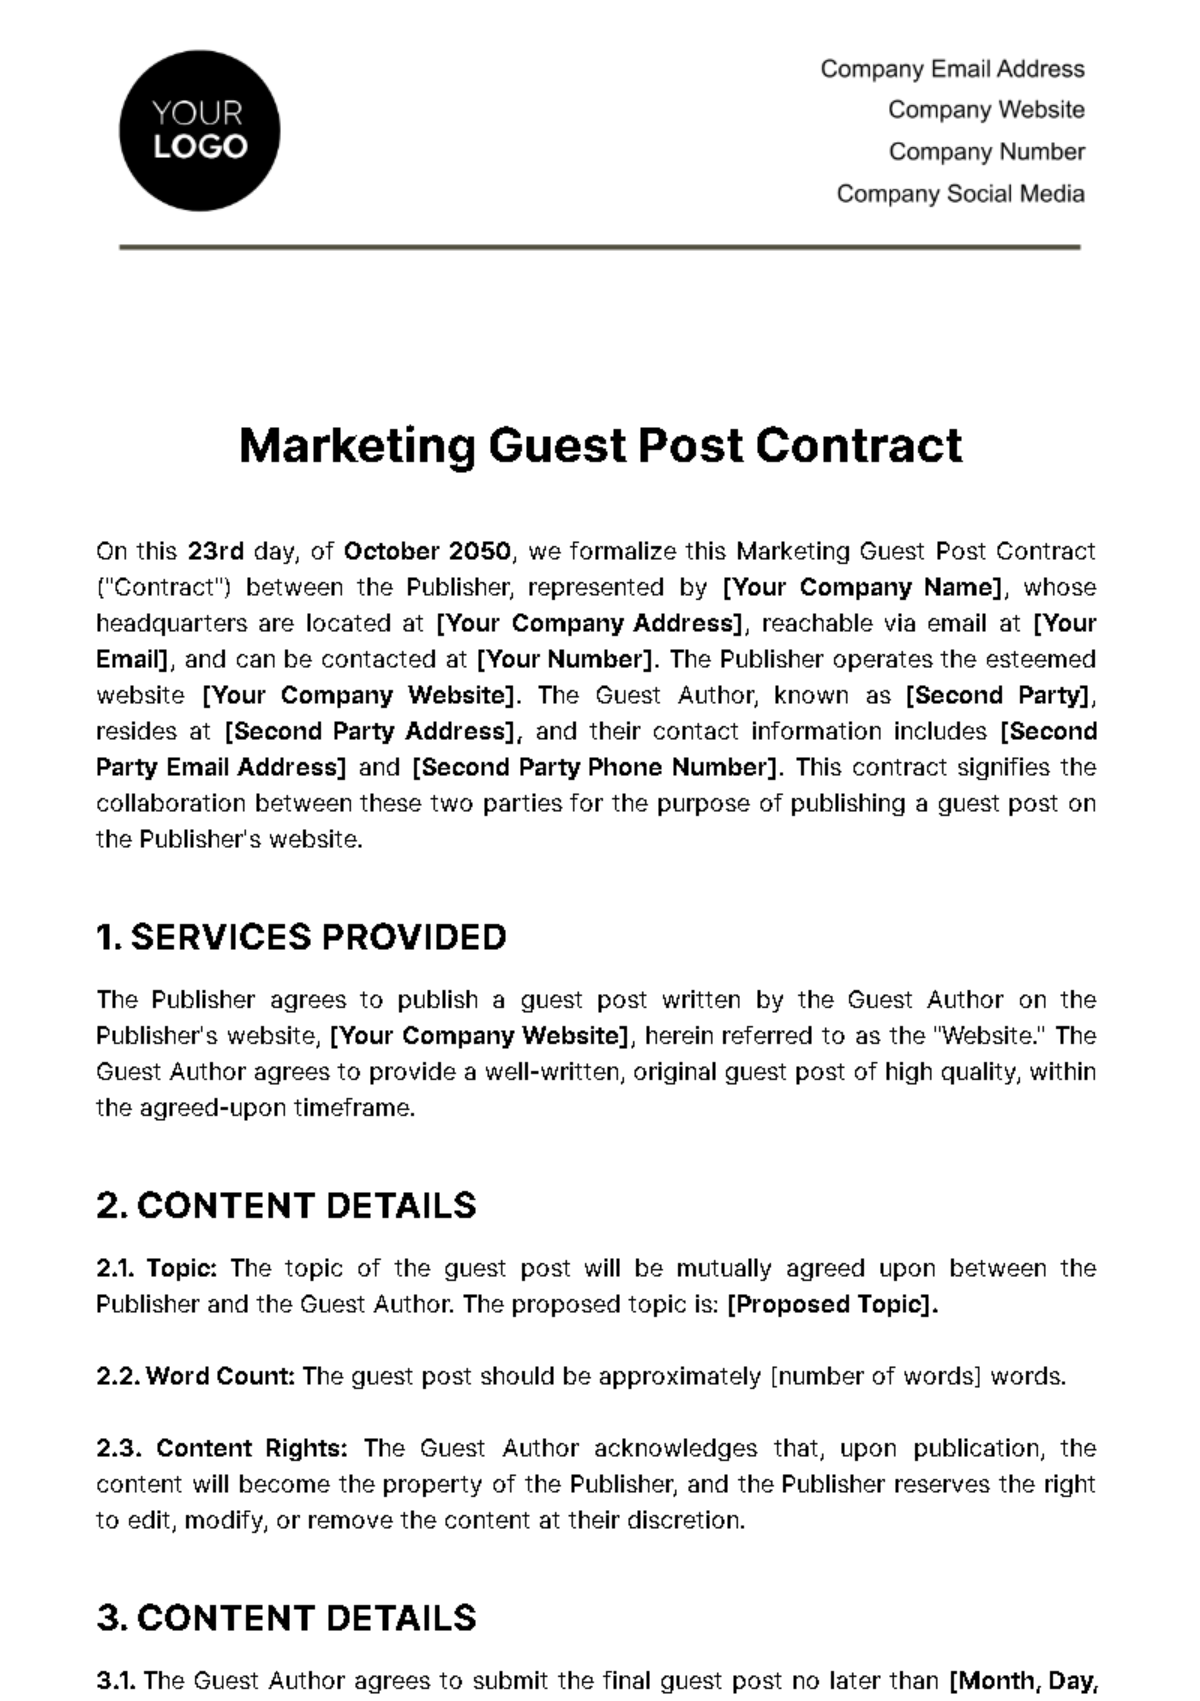 Marketing Guest Post Contract Template